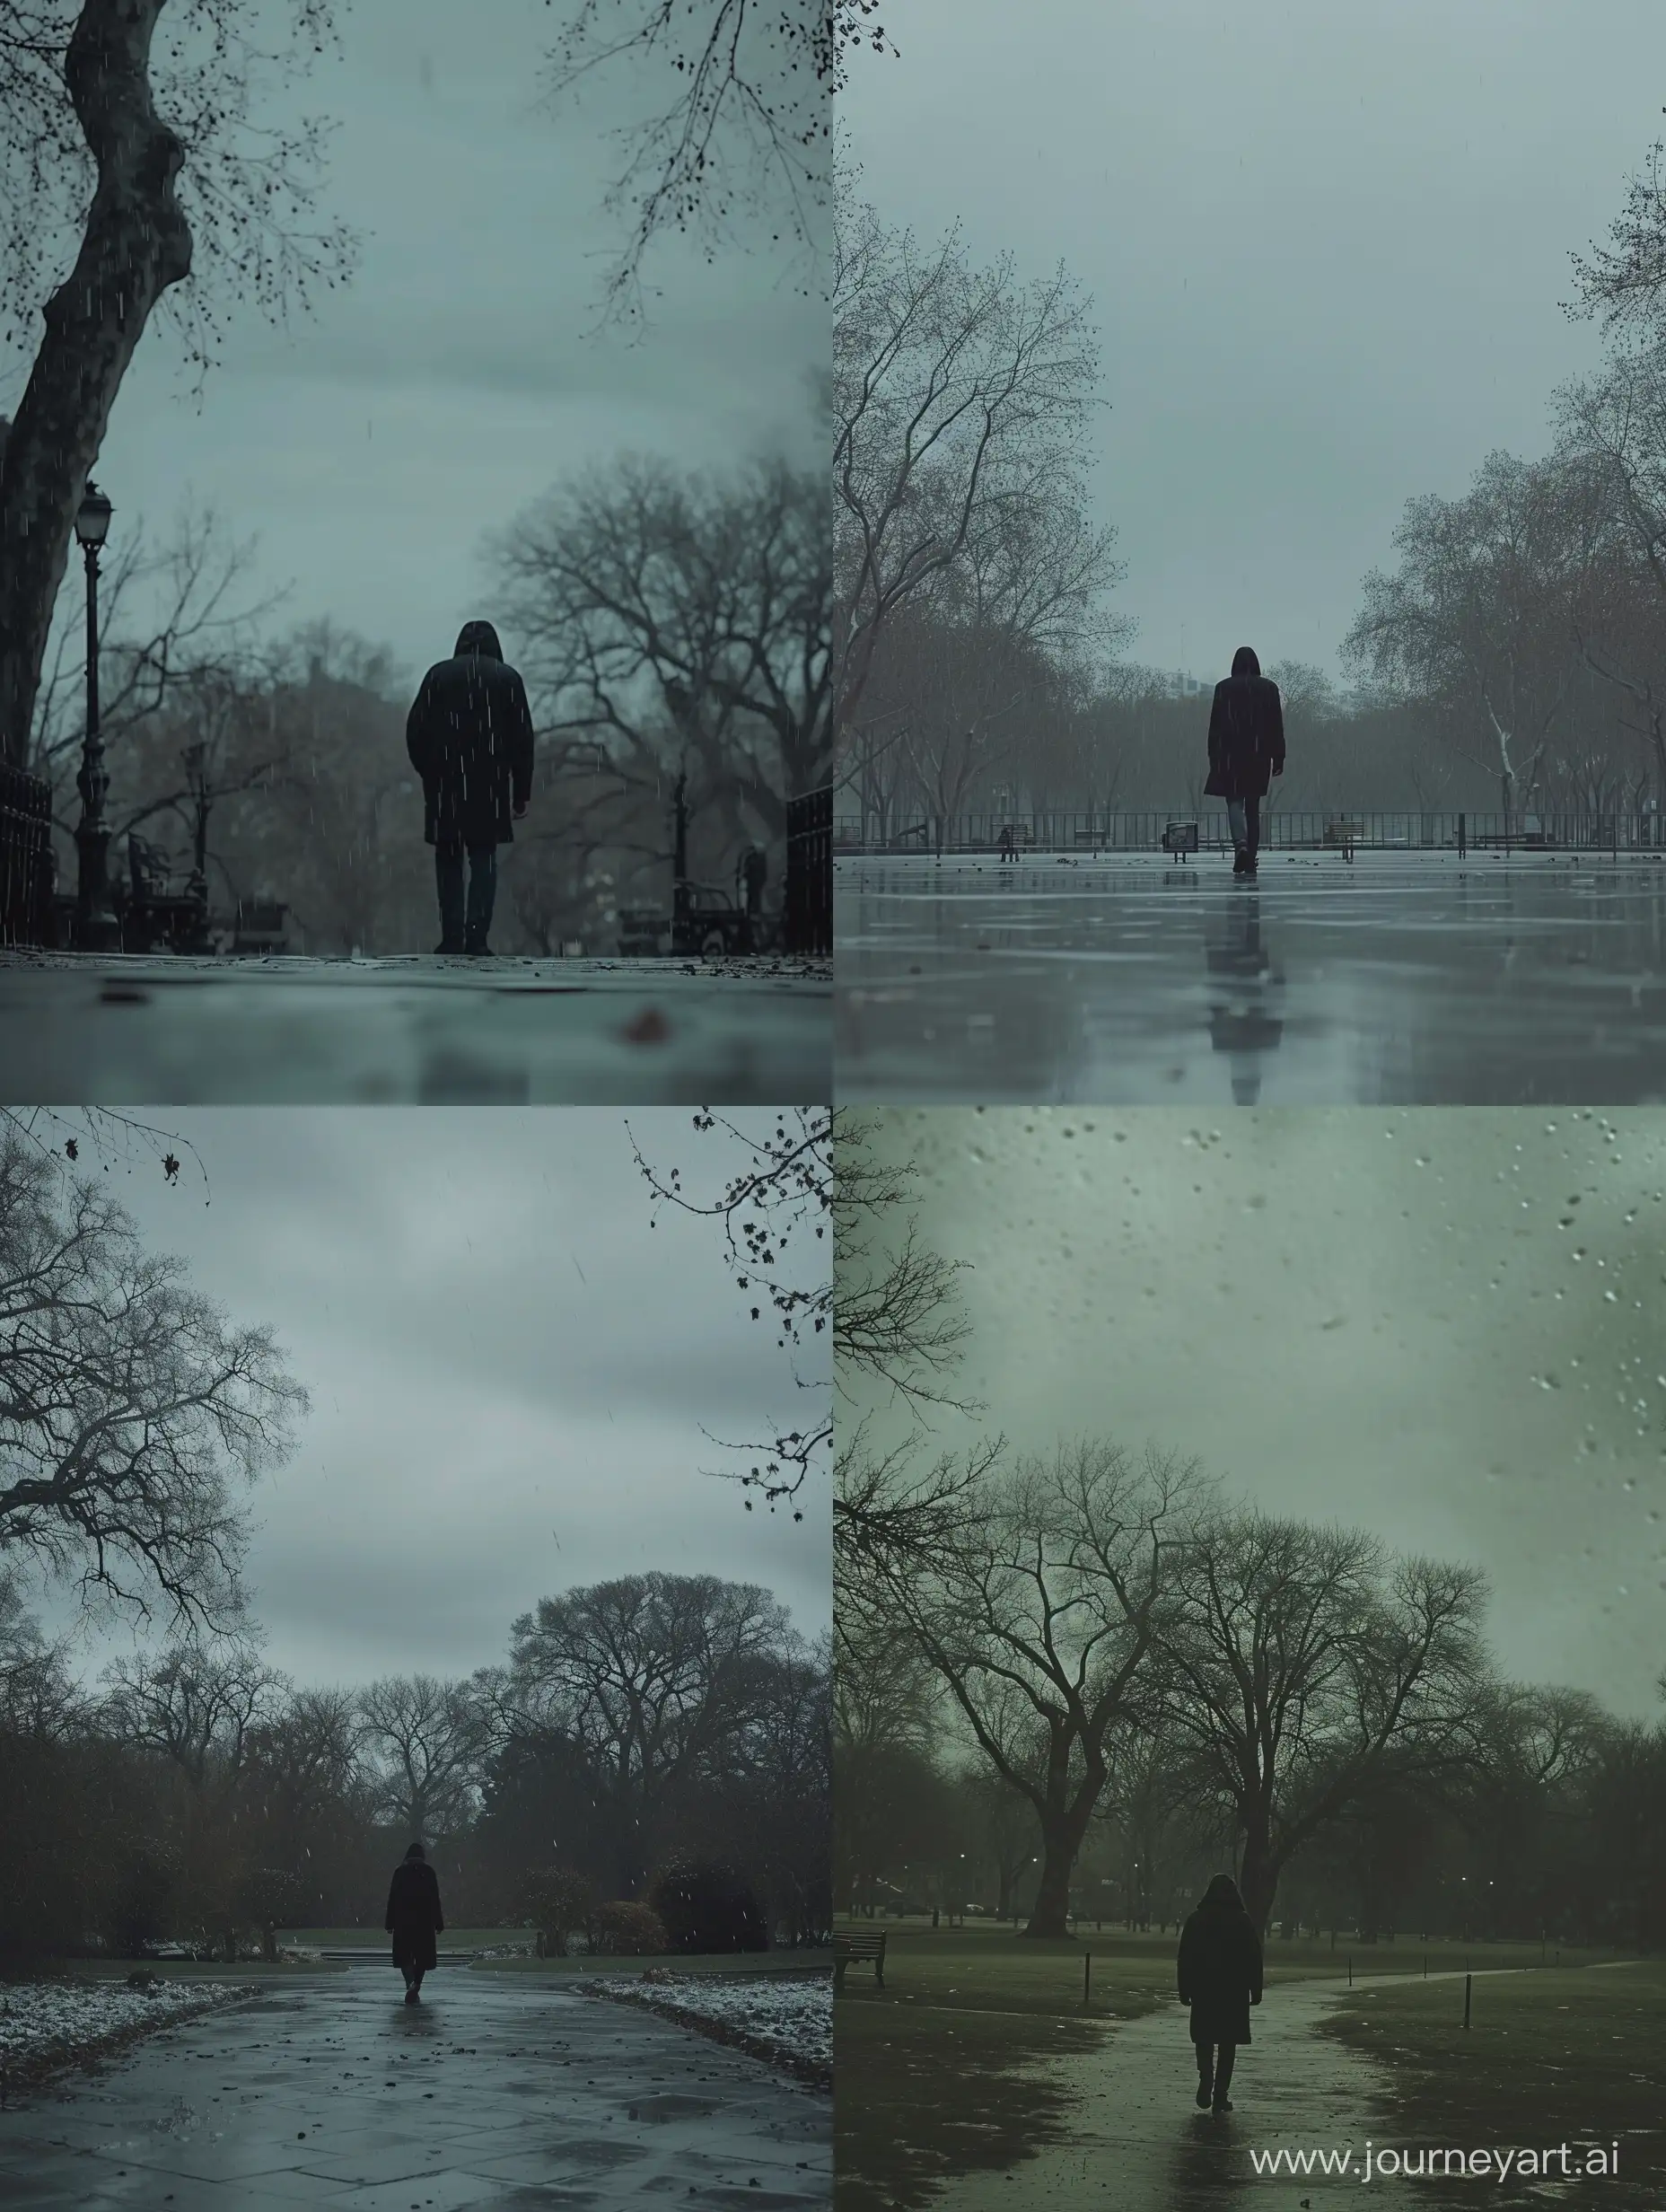 Solitude-Stroll-Expressive-Rainy-Day-Scene-in-Song-Name-Music-Video